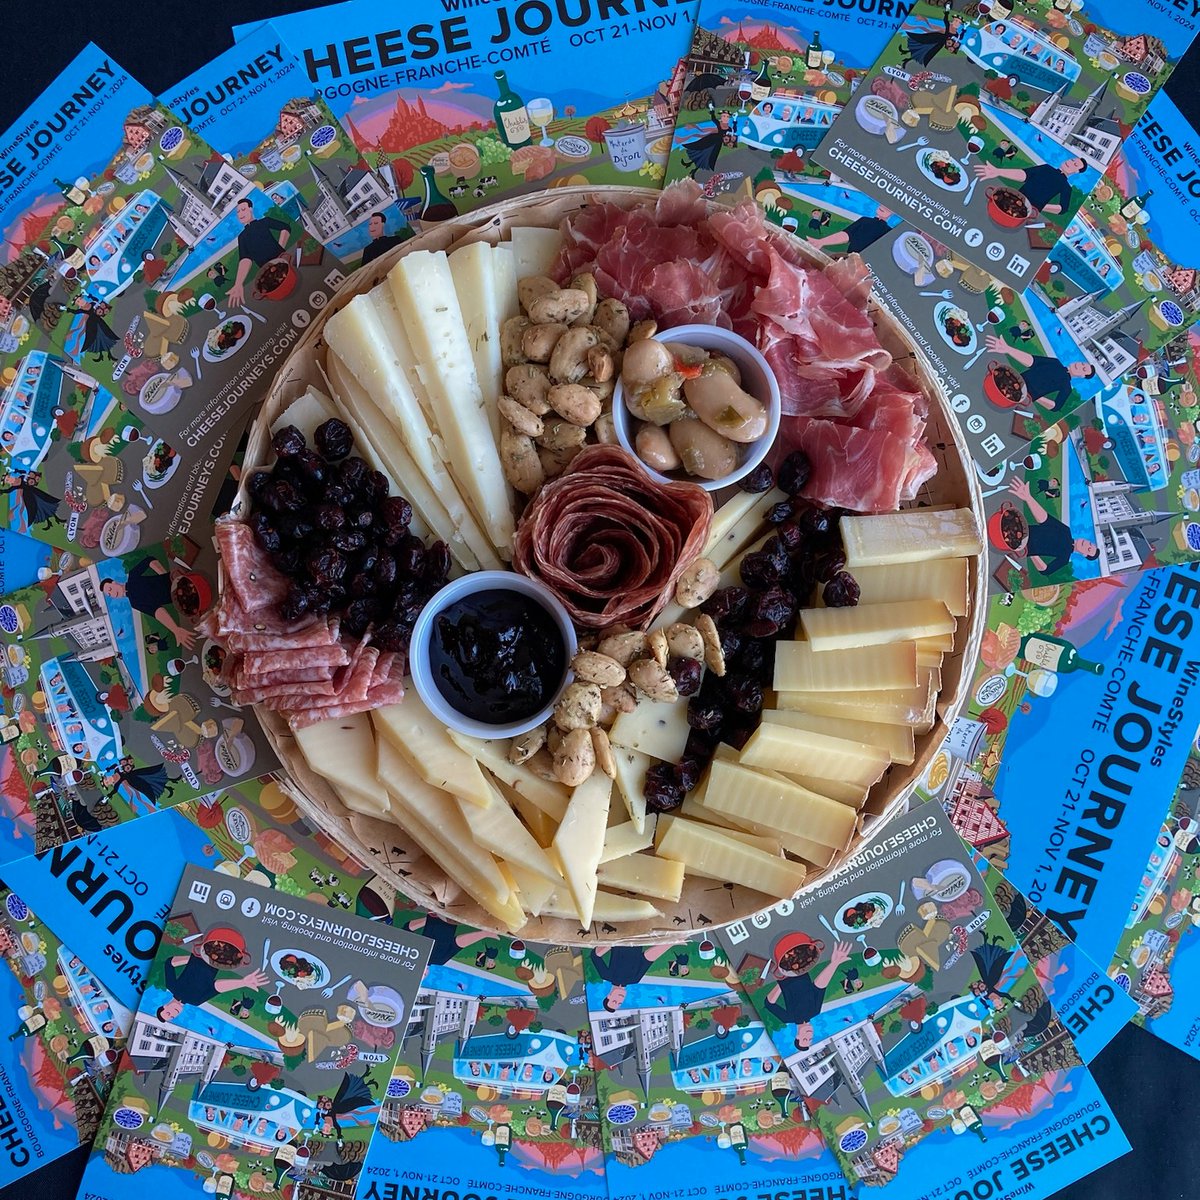 Travel with us this year ✈️🍷🧀 You’ll experience great food, fine wine and spectacular scenery! Learn more about our upcoming trip to France with Cheese Journeys: bit.ly/3VFZuKS

#winestyles #wineandcheese #wine #cheese #cheesejourneys #culinarytravel #cheeselover #food